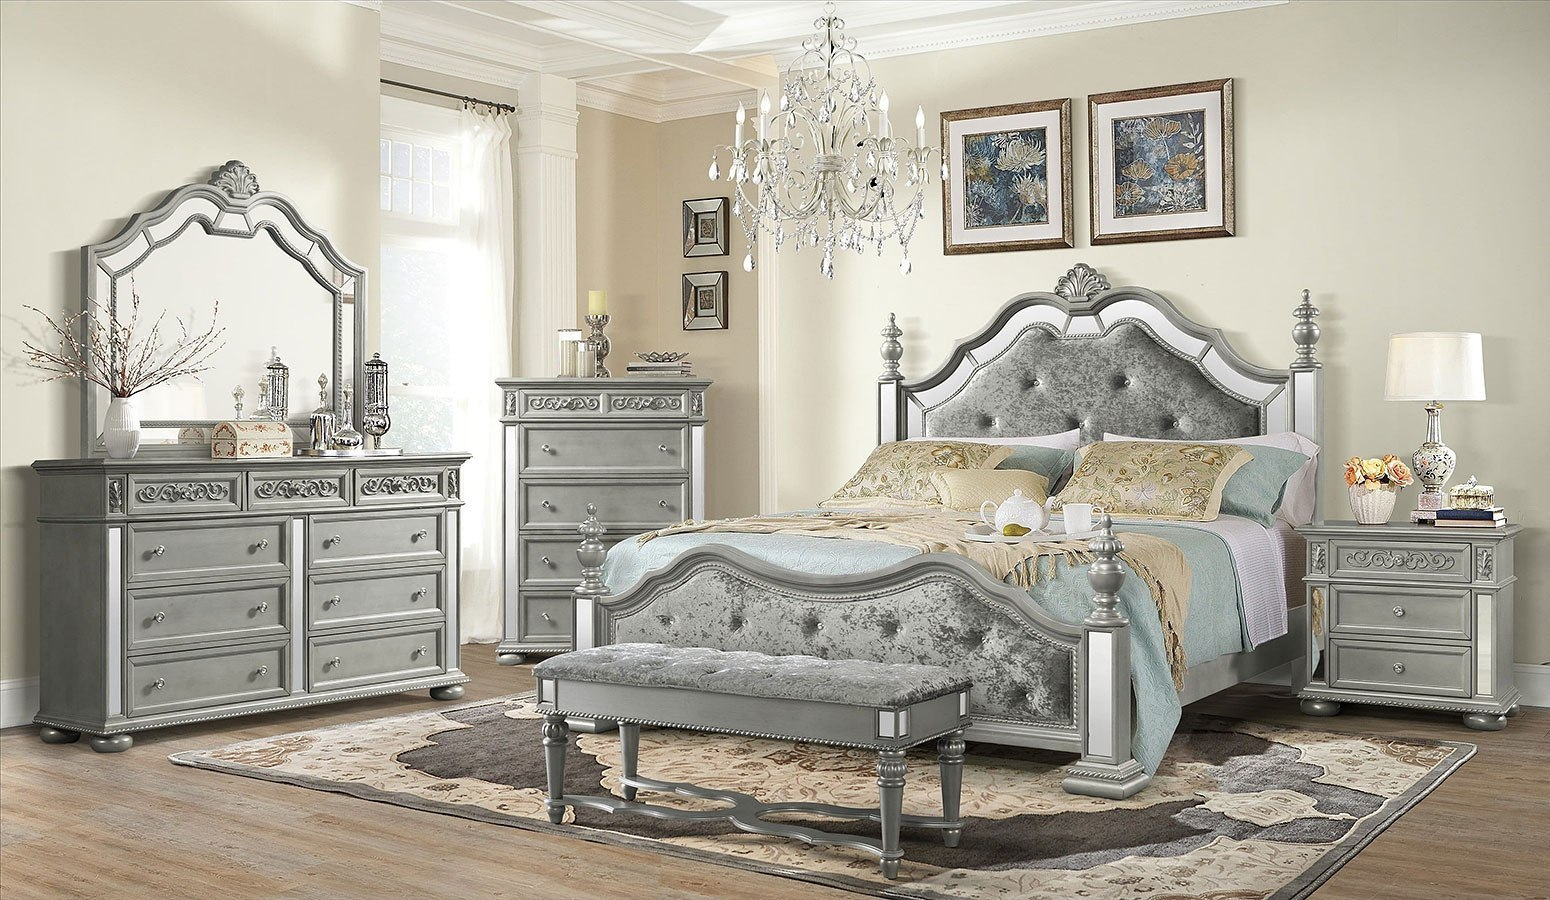 Diana Poster Bedroom Set Silver with regard to dimensions 1550 X 900